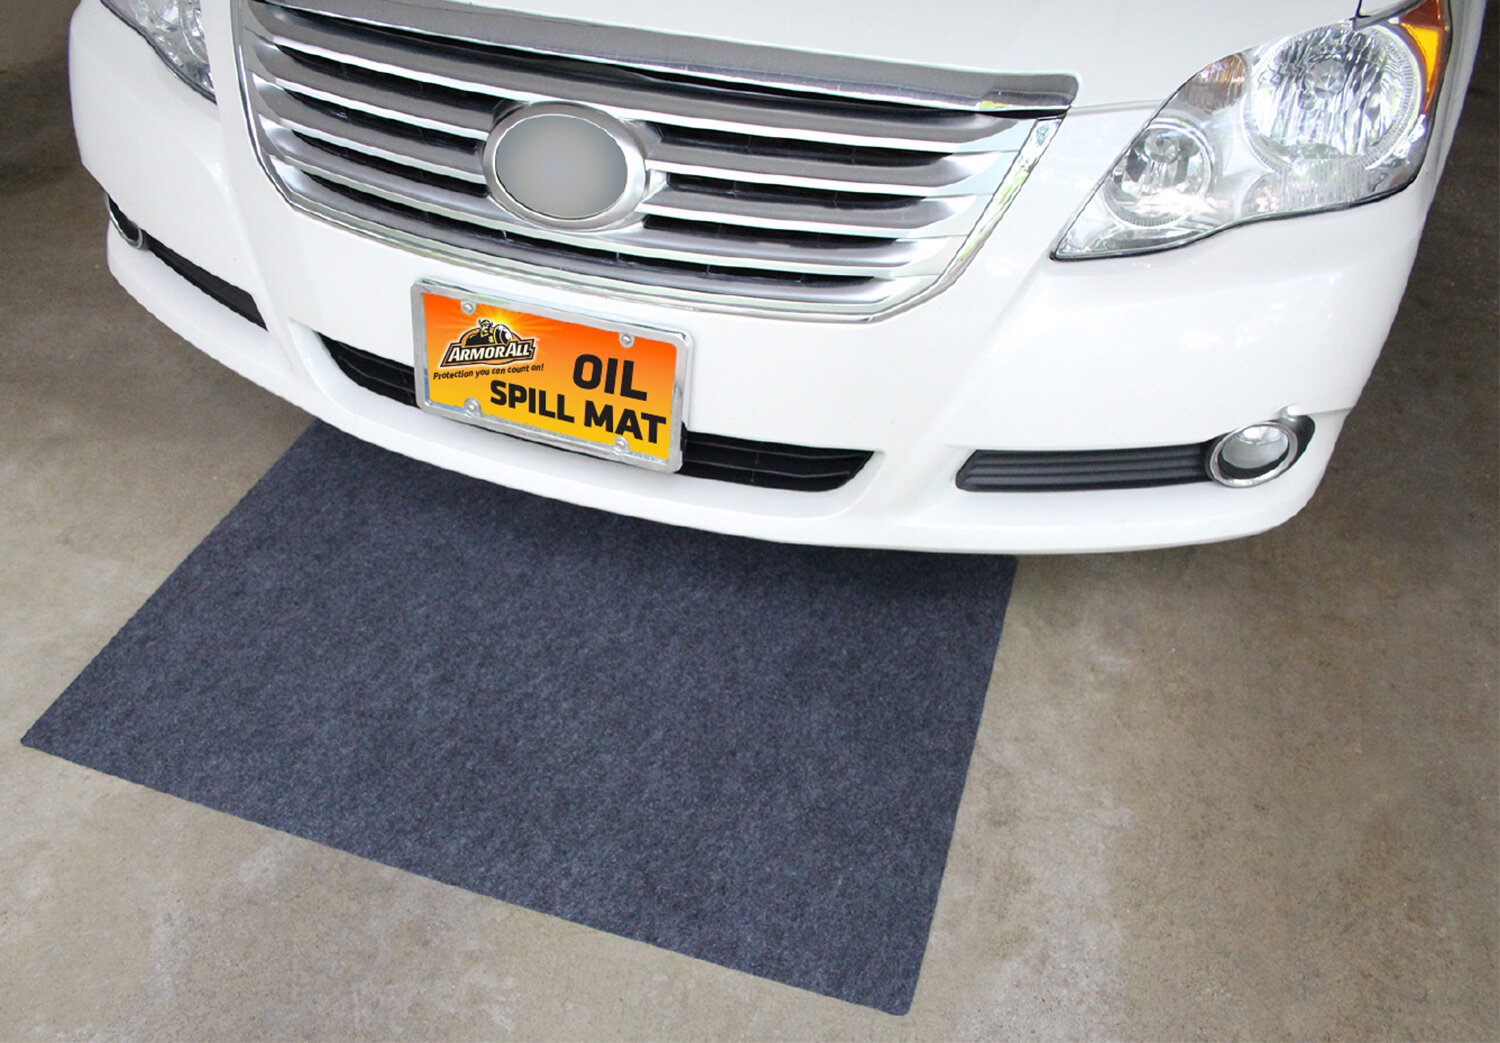 Armor All Oil Spill Mat, Absorbent Pad Contains Liquids, Protects